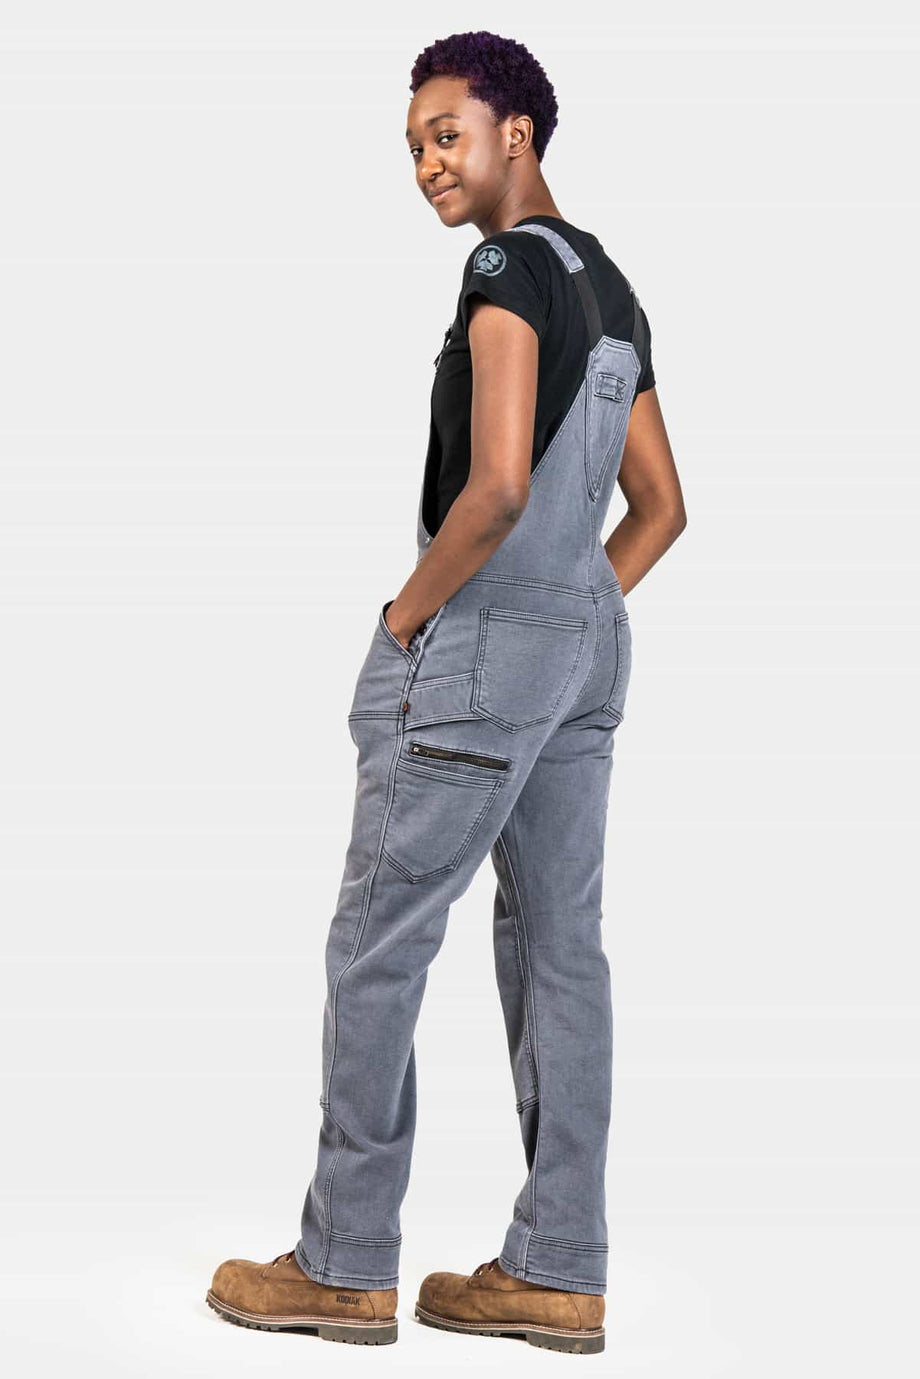 Street Fashion SidePocket Outdoor Overalls Long Pants Men Jeans  China  Jeans and Men Jeans price  MadeinChinacom